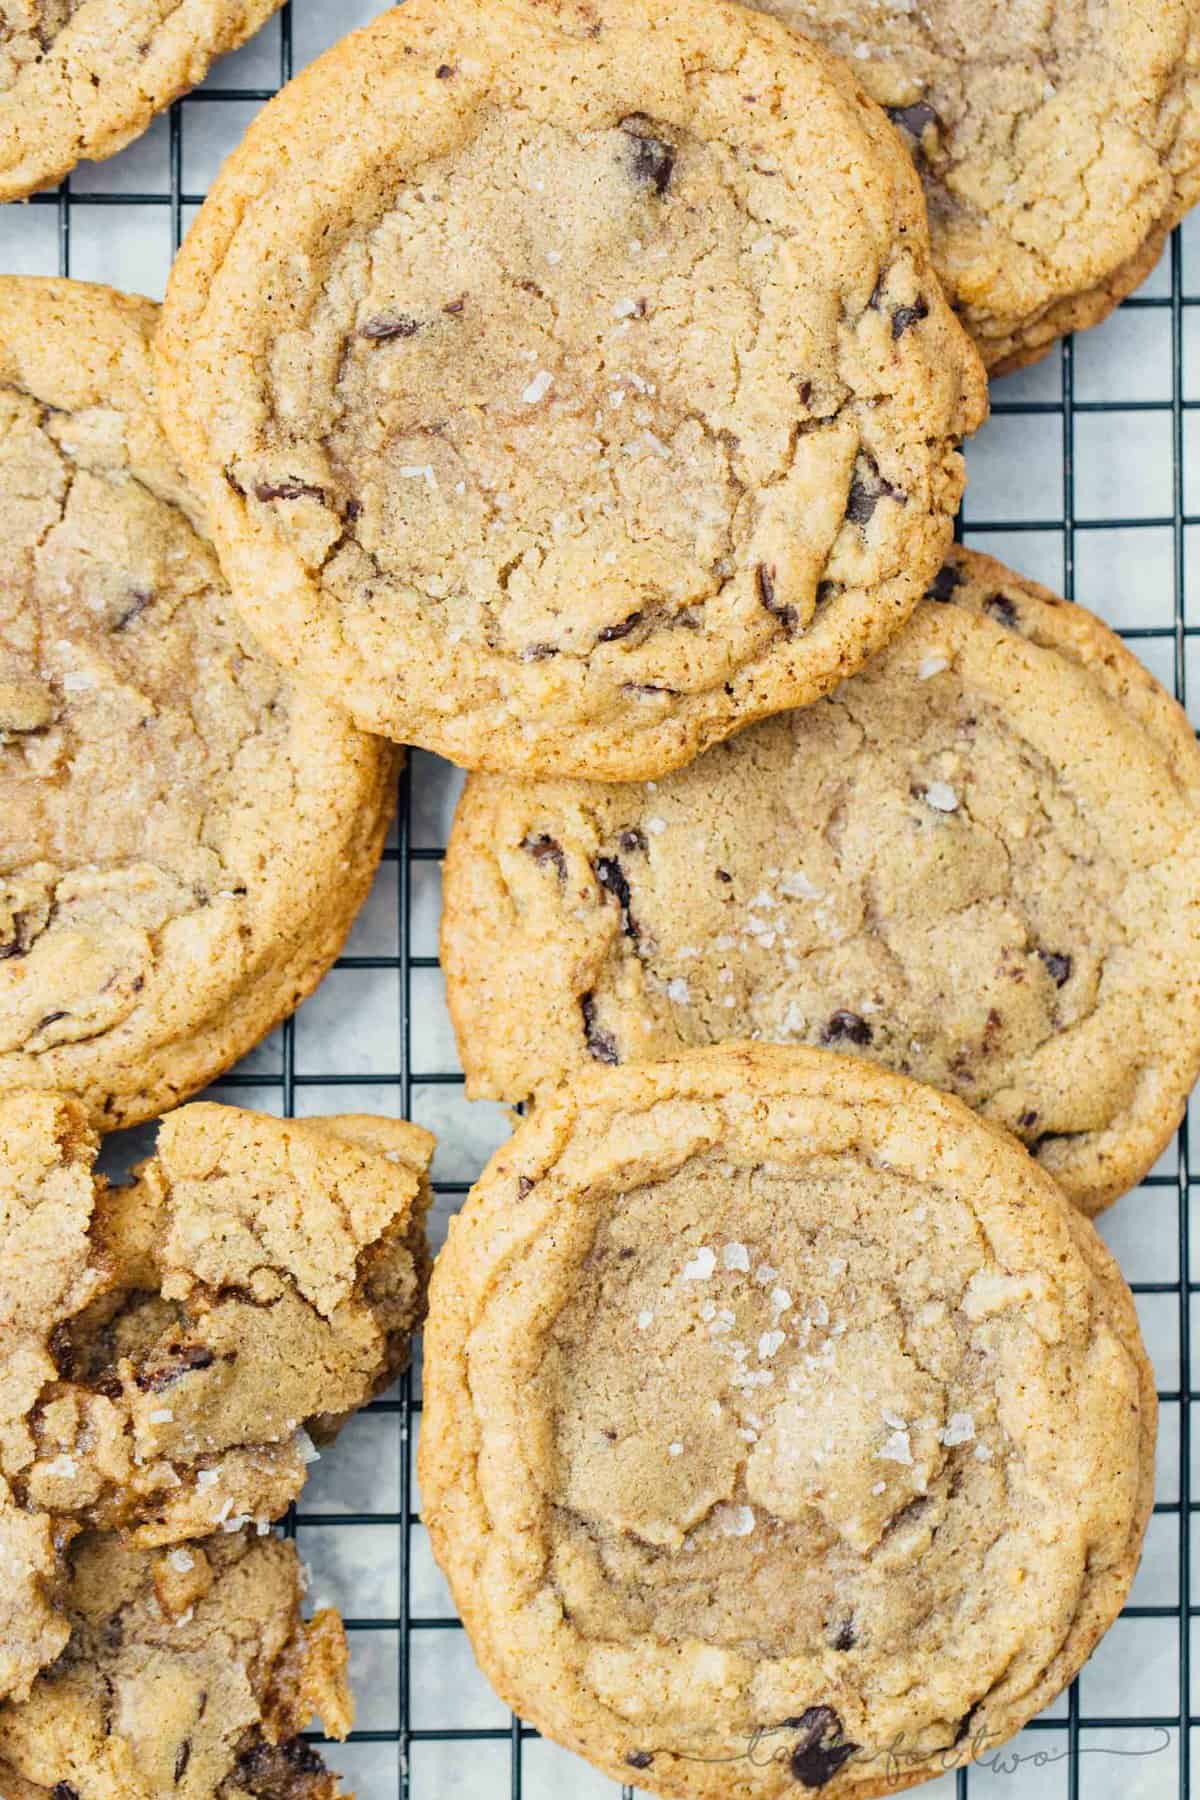 The perfect cookie has crispy edges with a soft and chewy center! These chewy chai chocolate chunk cookies do not disappoint and you'll love having a batch of these in the oven because it makes your house smell so delicious! The warming chai spice is the perfect addition to these cookies!